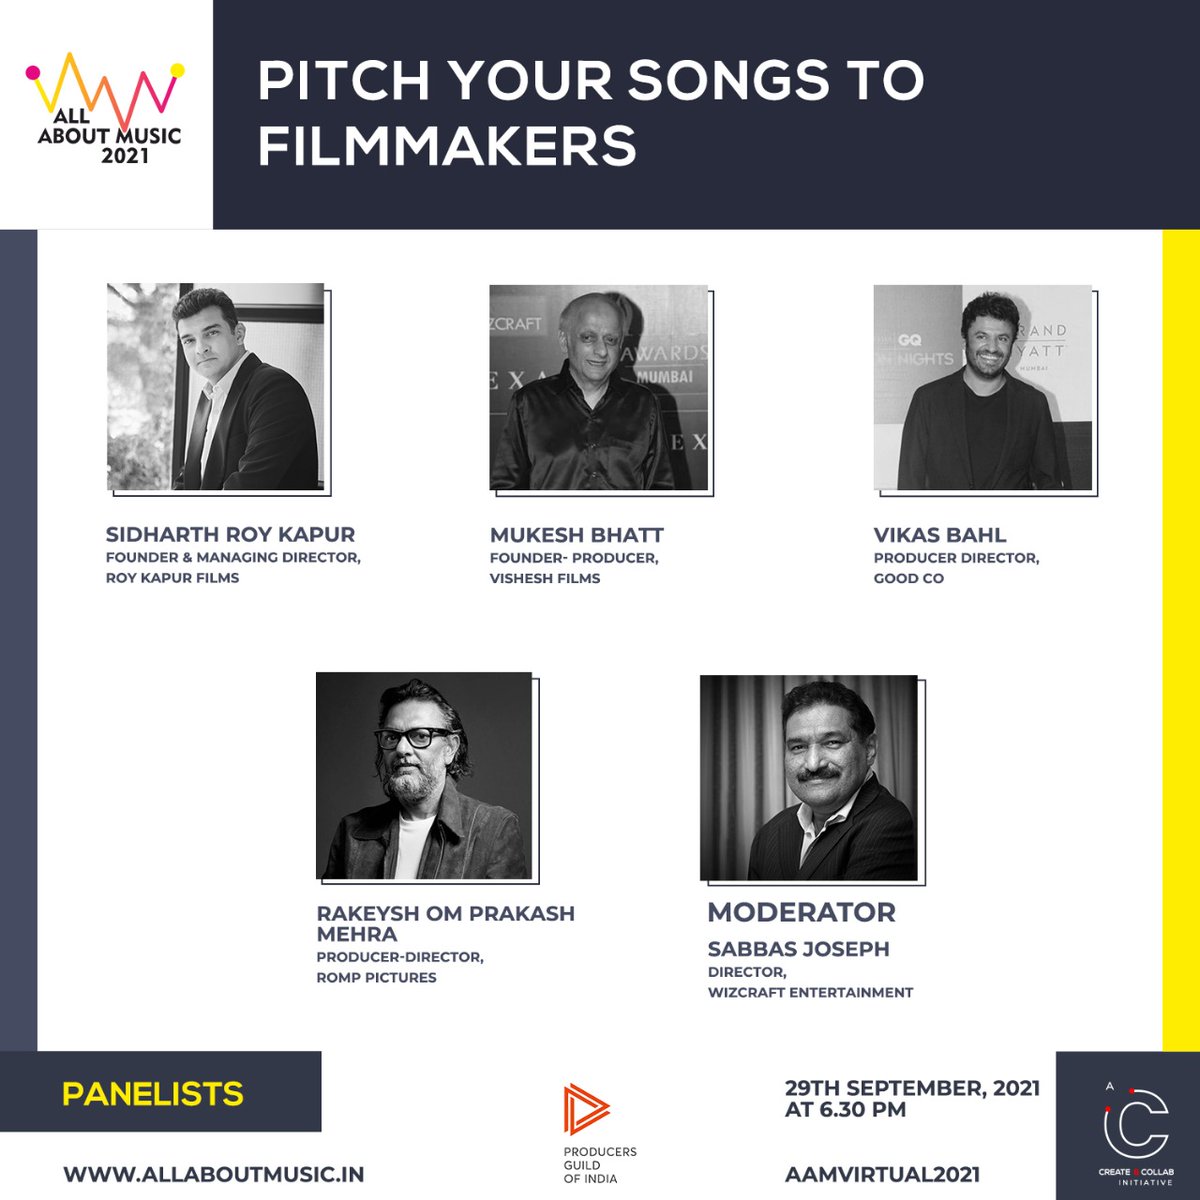 The panel session at the 5th edition of All About Music Moderated by @wizsabbas celebrates the evolution of the #Indian Musical Industry! Tune in to pitch your songs to some of the best filmmakers across India! #wizcraft #music #festival #event #musicians #indiafilmfestival